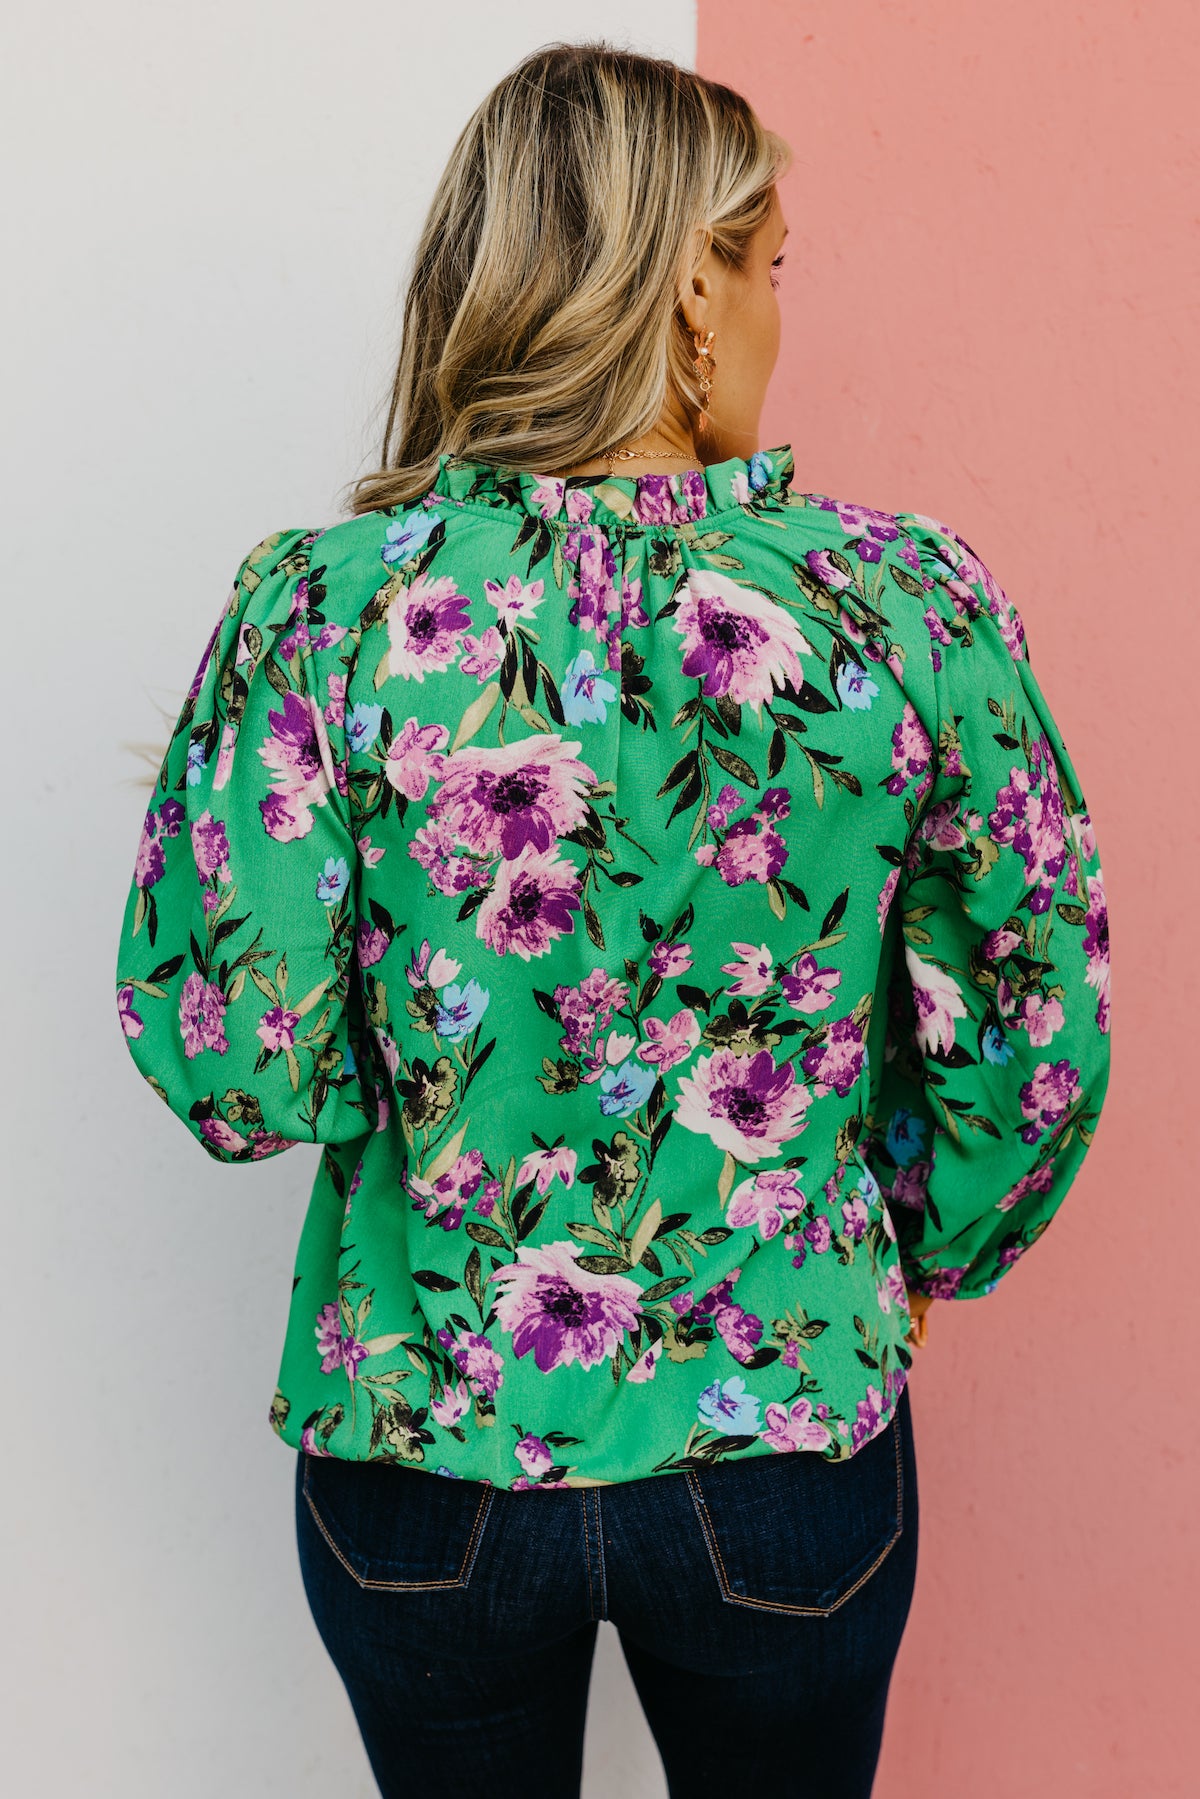 The Alfonso Floral Puff Sleeve Blouse